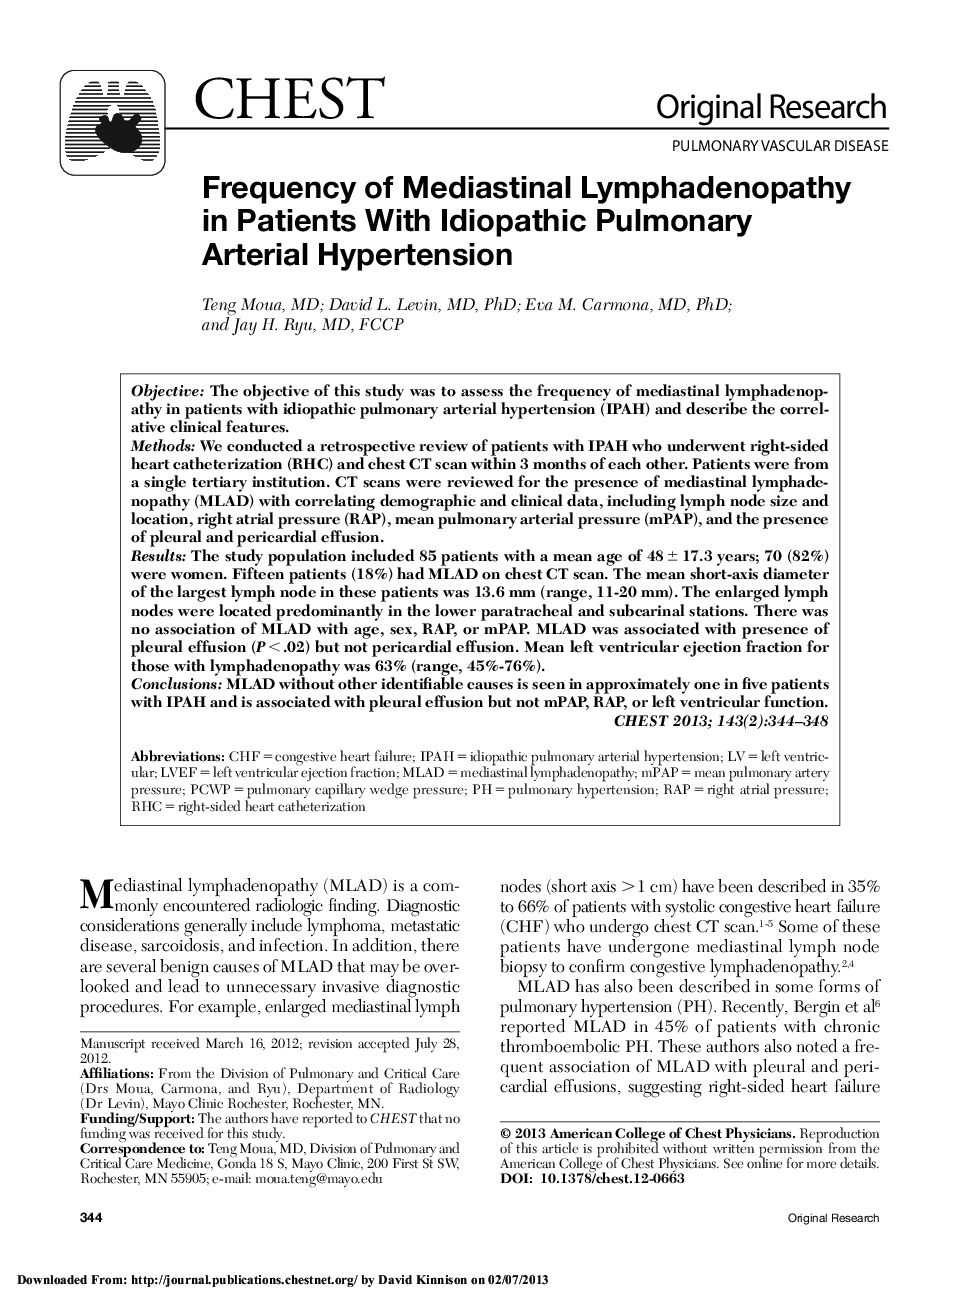 Original ResearchPulmonary Vascular DiseaseFrequency of Mediastinal Lymphadenopathy in Patients With Idiopathic Pulmonary Arterial Hypertension